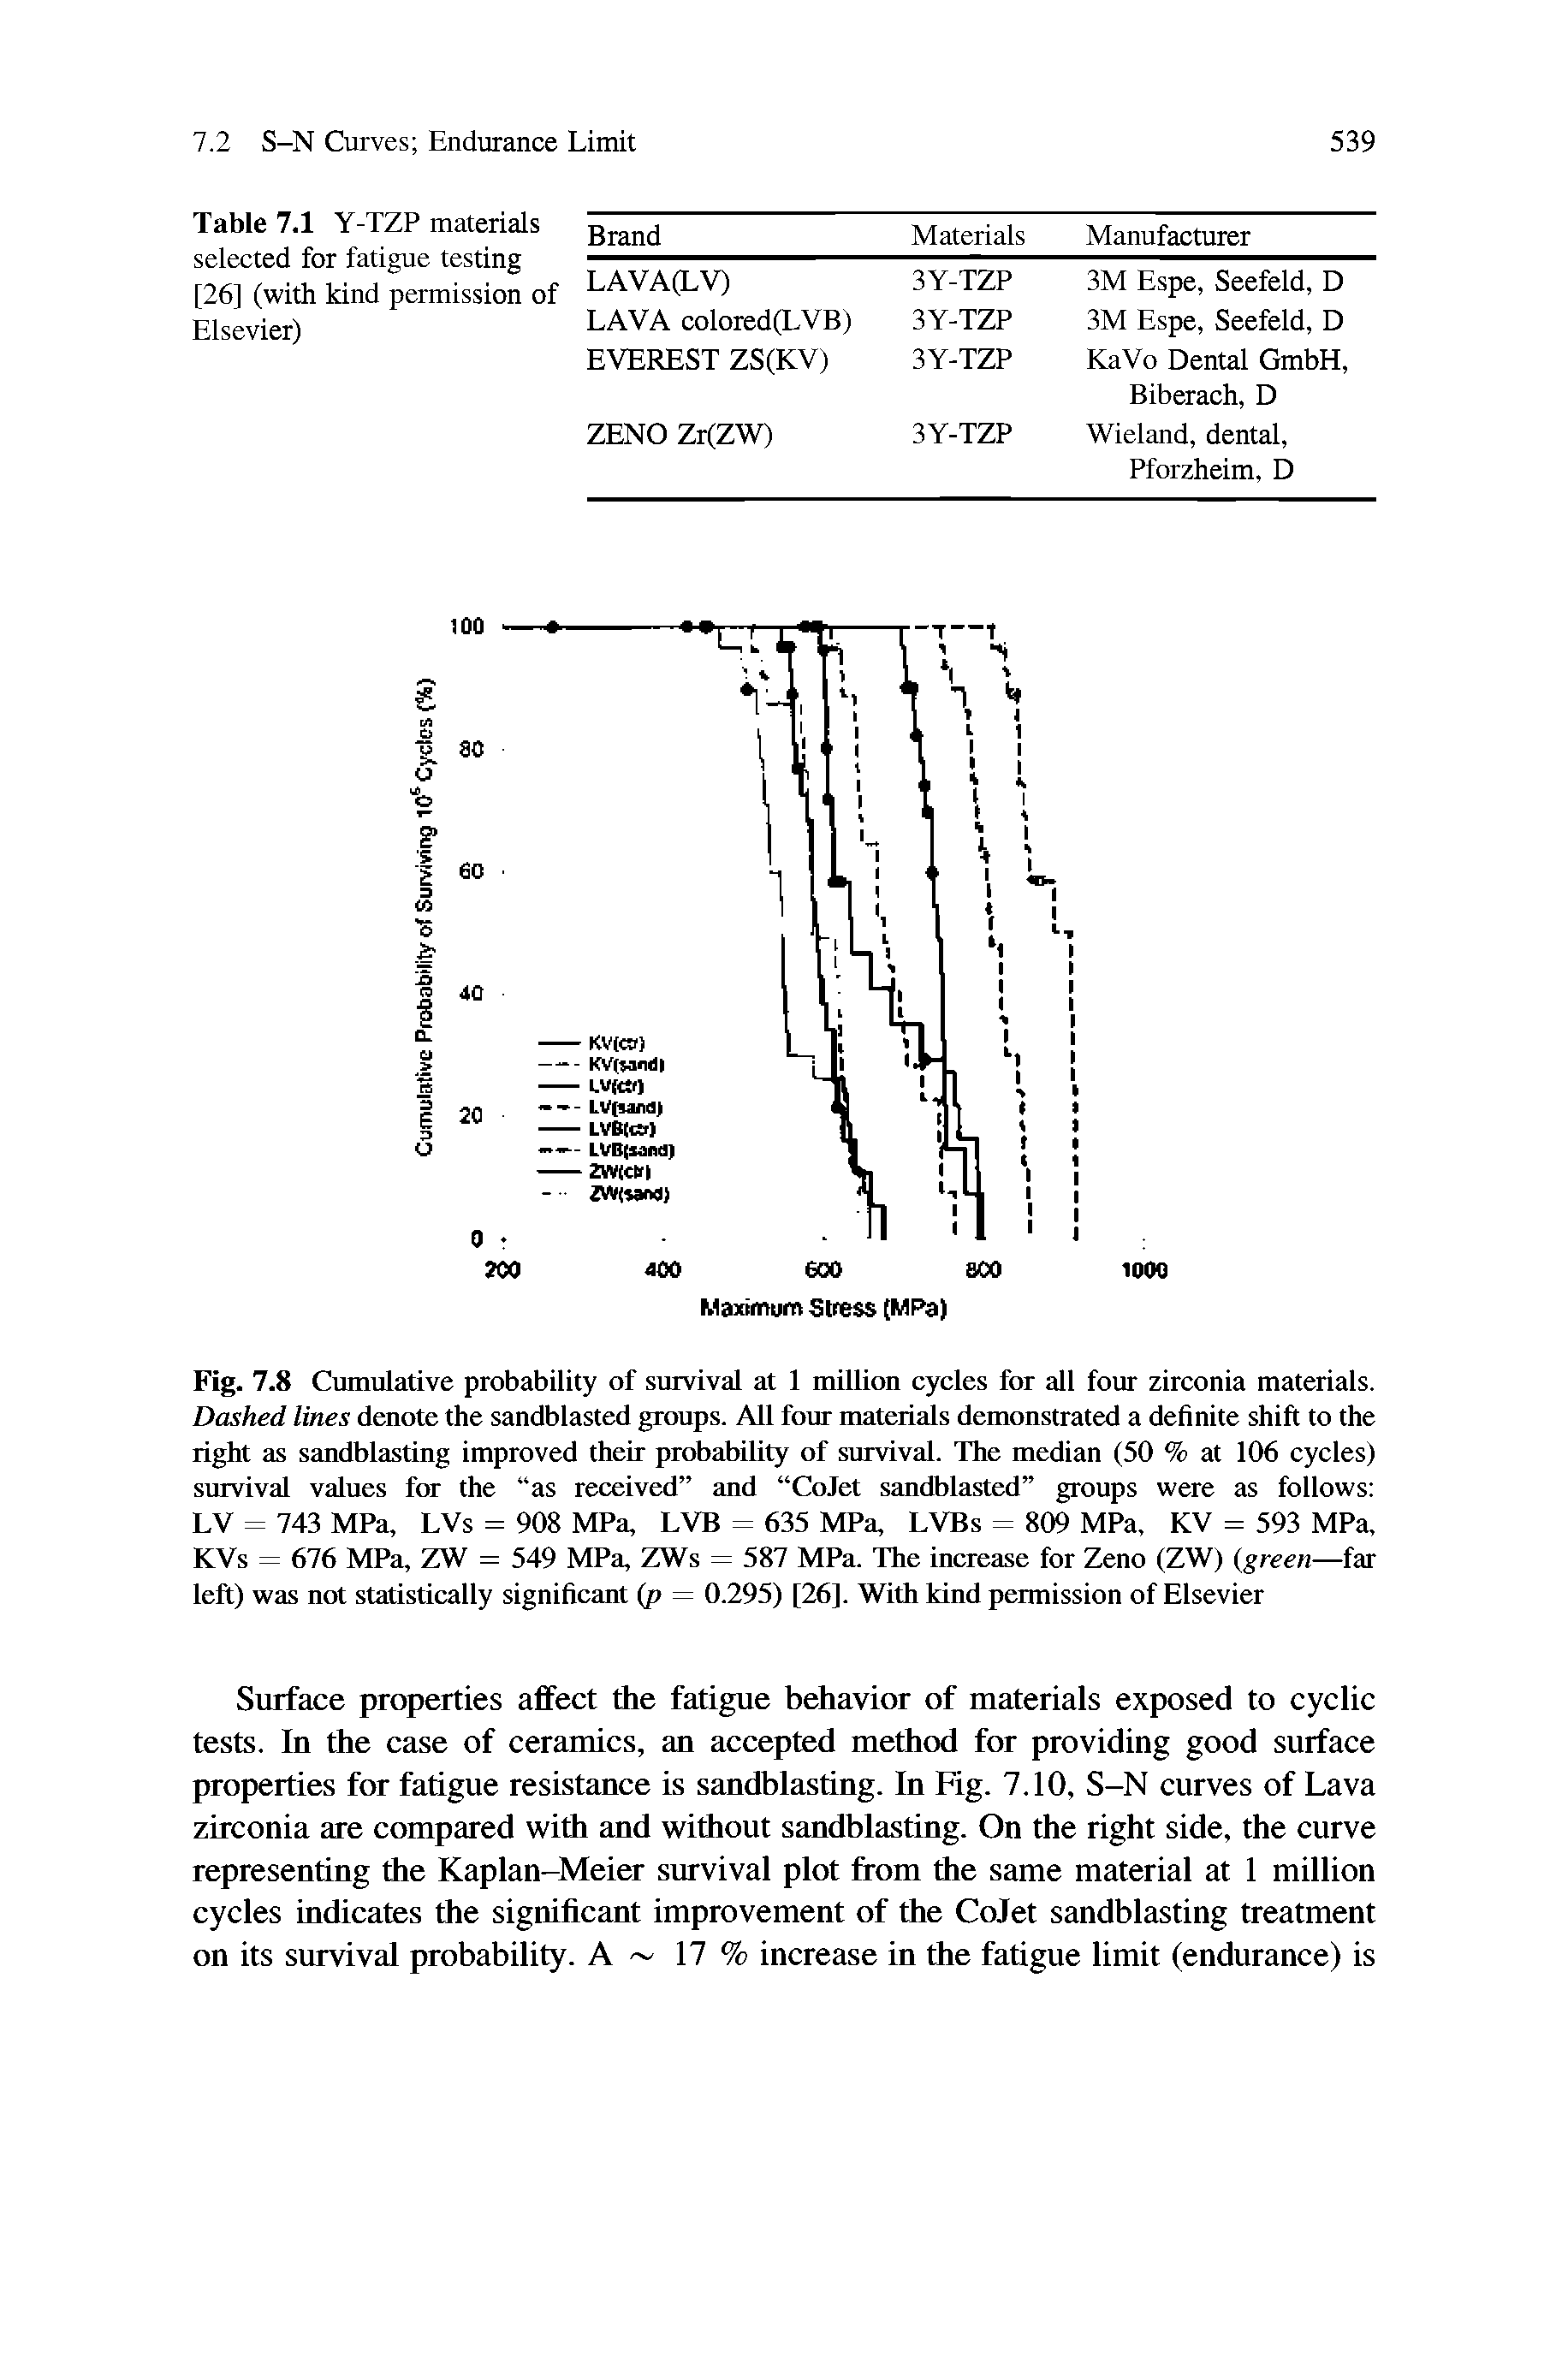 Fig. 7.8 Cumulative probability of survival at 1 million cycles for all four zirconia materials. Dashed lines denote the sandblasted groups. All four materials demonstrated a definite shift to the right as sandblasting improved their probability of survival. The median (50 % at 106 cycles) survival values Iot the as received and CoJet sandblasted groups were as follows LV = 743 MPa, LVs = 908 MPa, LVB = 635 MPa, LVBs = 809 MPa, KV = 593 MPa, KVs = 676 MPa, ZW = 549 MPa, ZWs = 587 MPa. The increase for Zeno (ZW) (green—far left) was not statistically significant (p = 0.295) [26]. With kind permission of Elsevier...